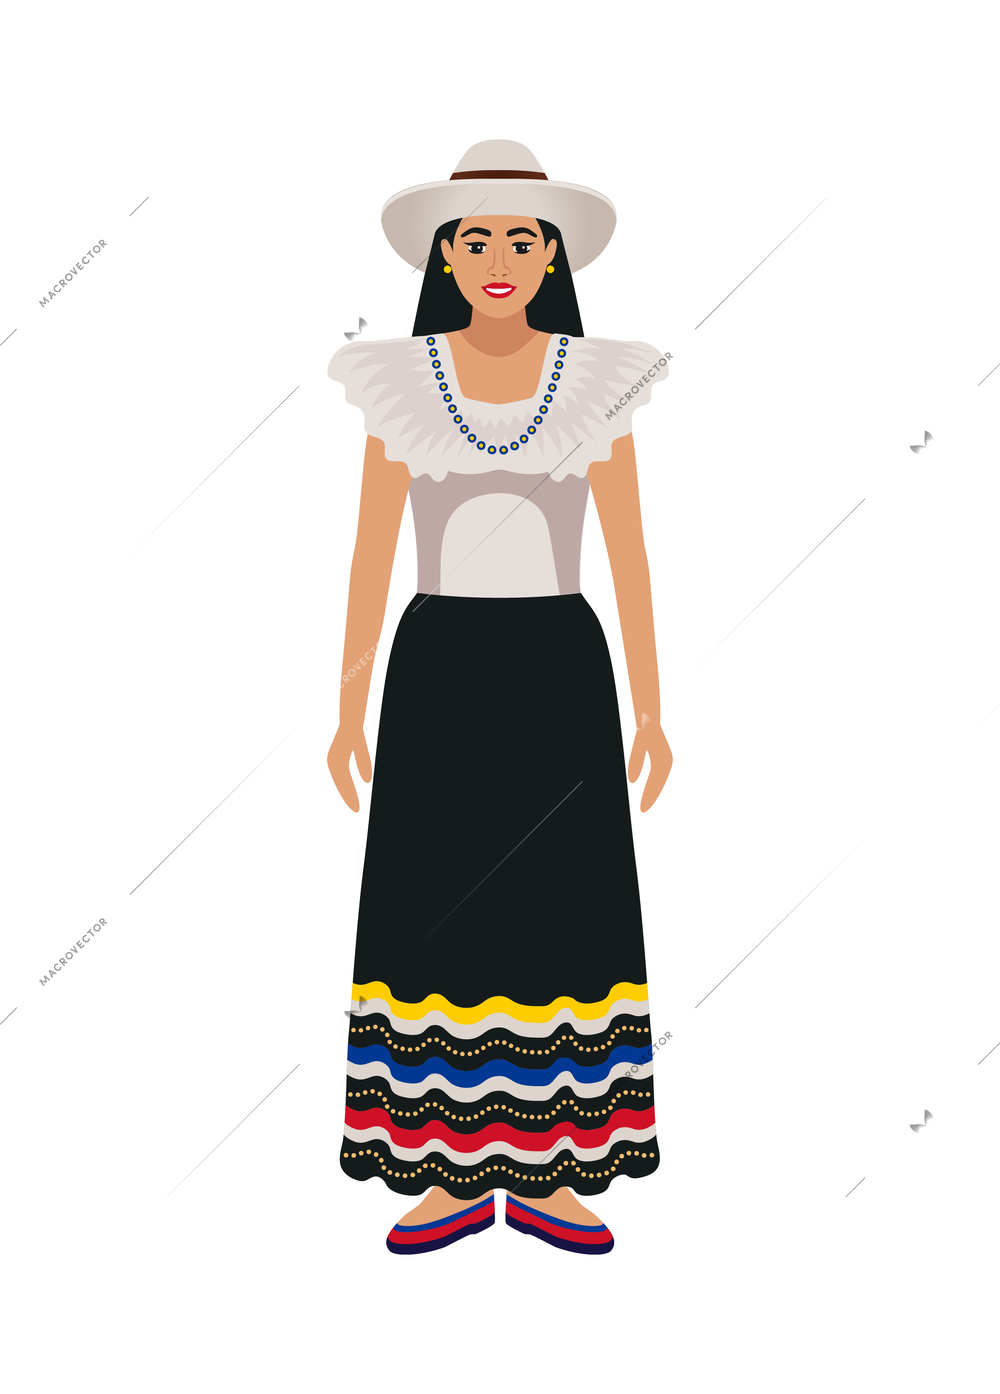 Colombia travel tourism composition with isolated character of woman in traditional costume on blank background vector illustration